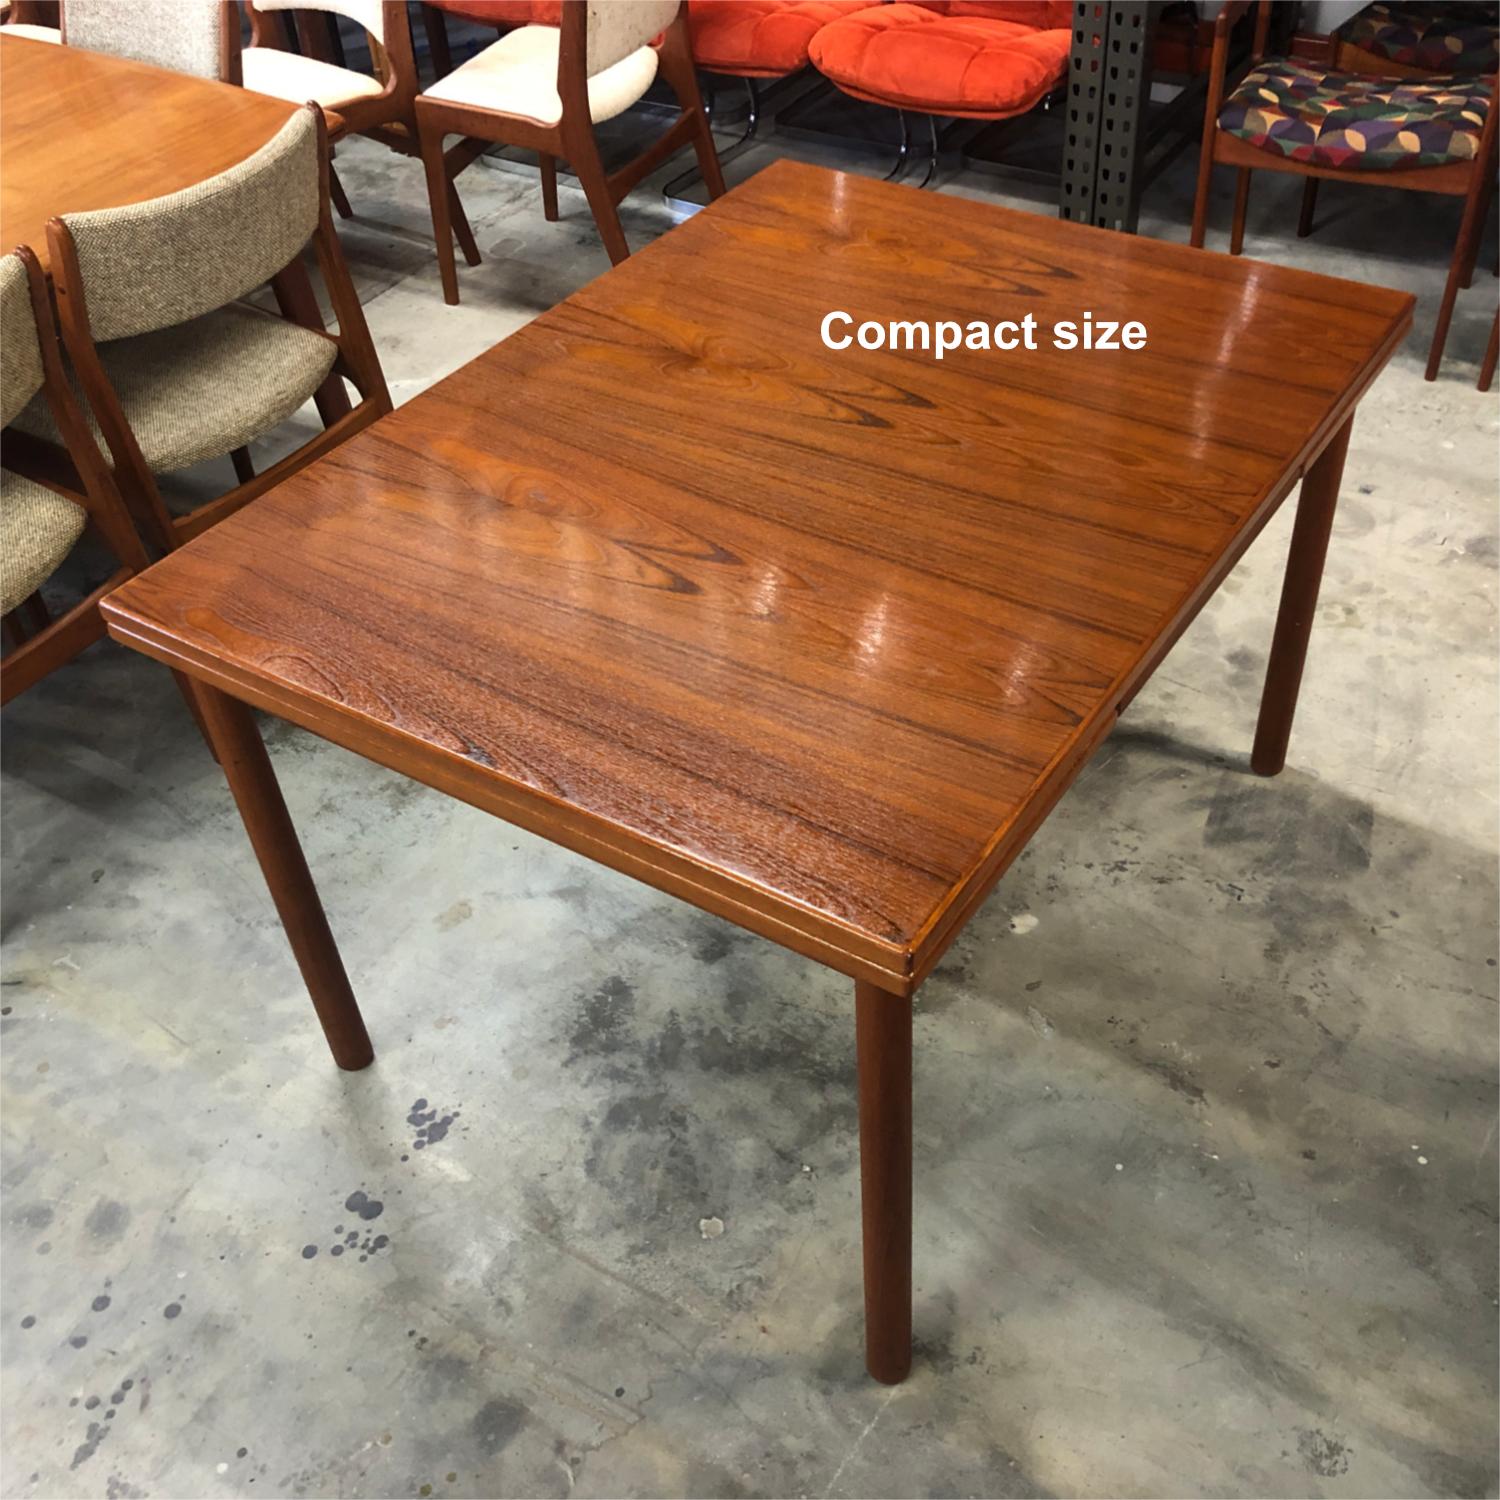 American Mid-Century Modern dining table made by Dixie. American maker’s worked primarily in walnut, almost never diving into teak. However, after the witnessing the desirability of Danish teak, these yanks jumped on board. This table is smaller